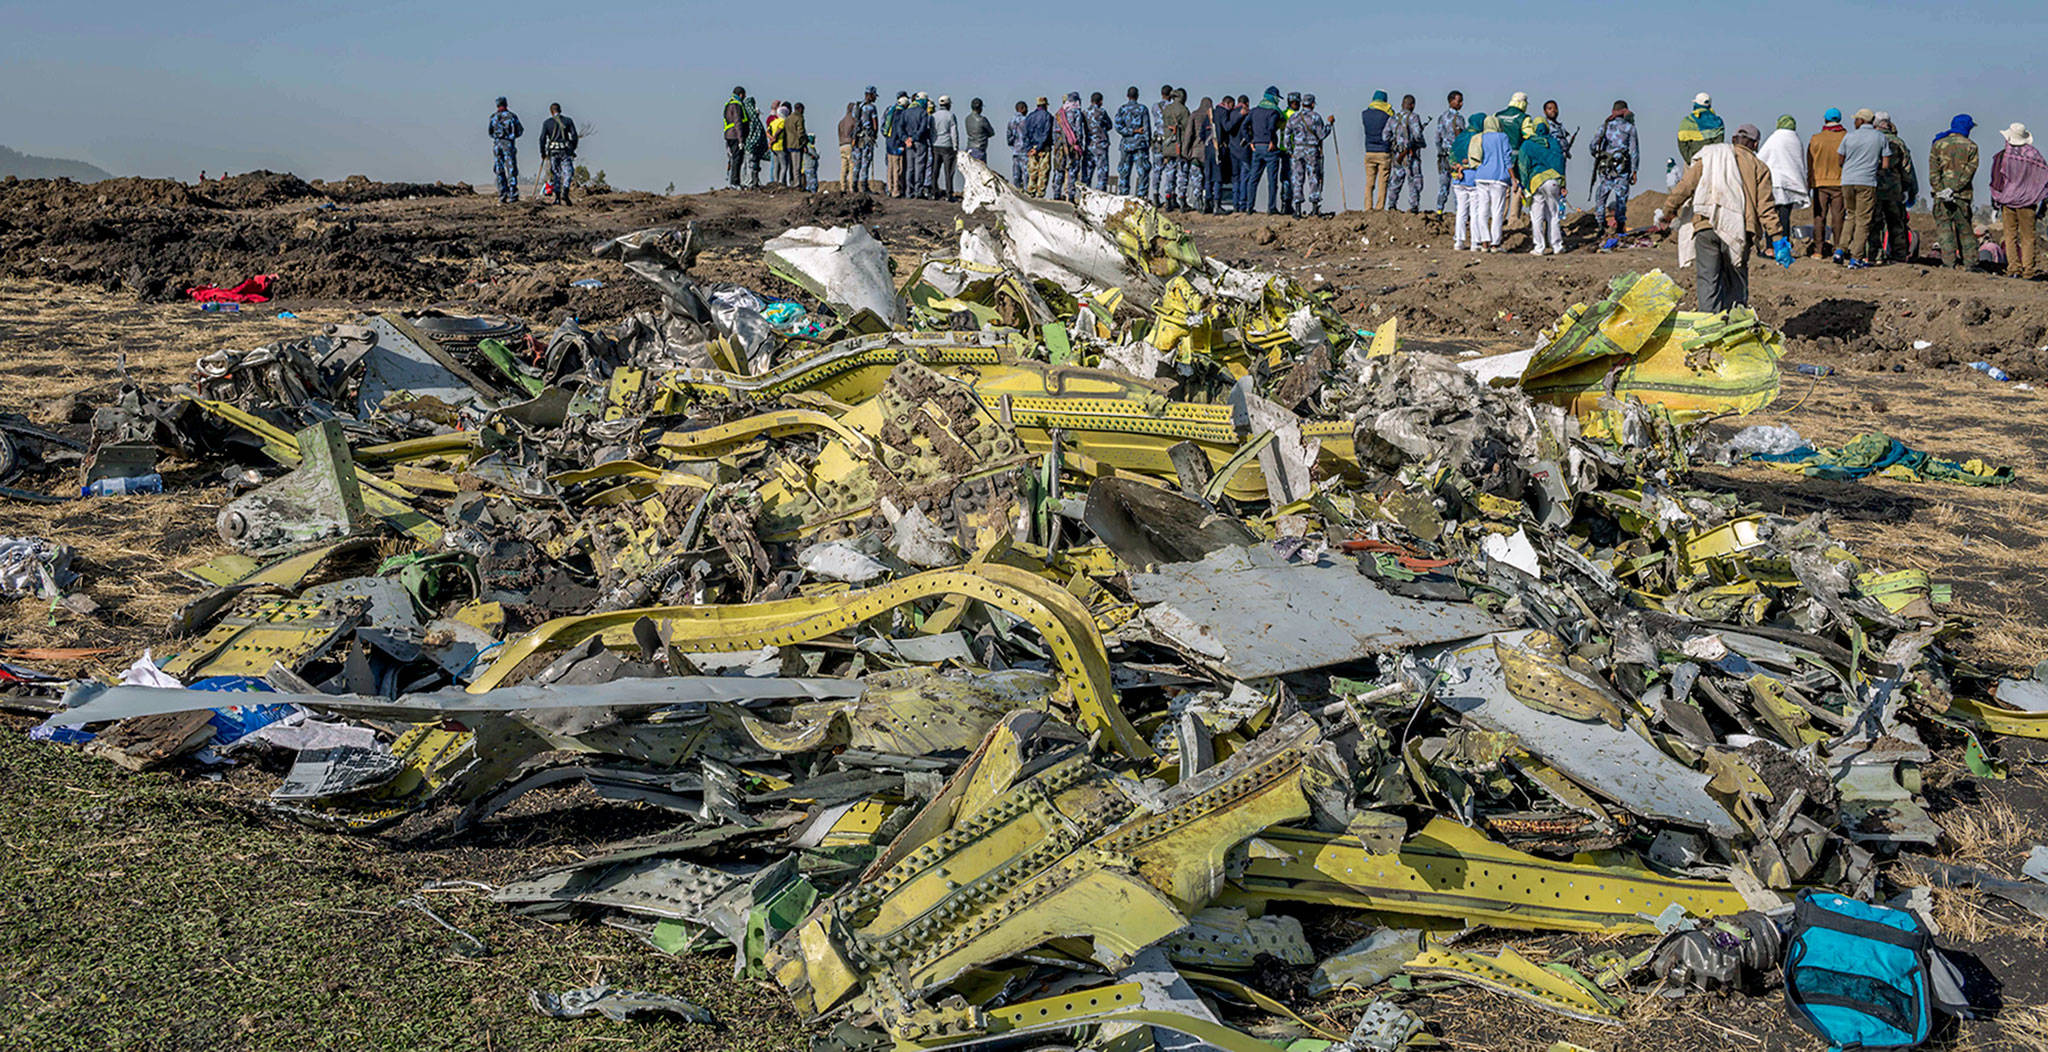 Wreckage at the crash scene of an Ethiopian Airlines Boeing 737 MAX 8 near Addis Ababa, Ethiopia, on March 11. (AP Photo/Mulugeta Ayene)